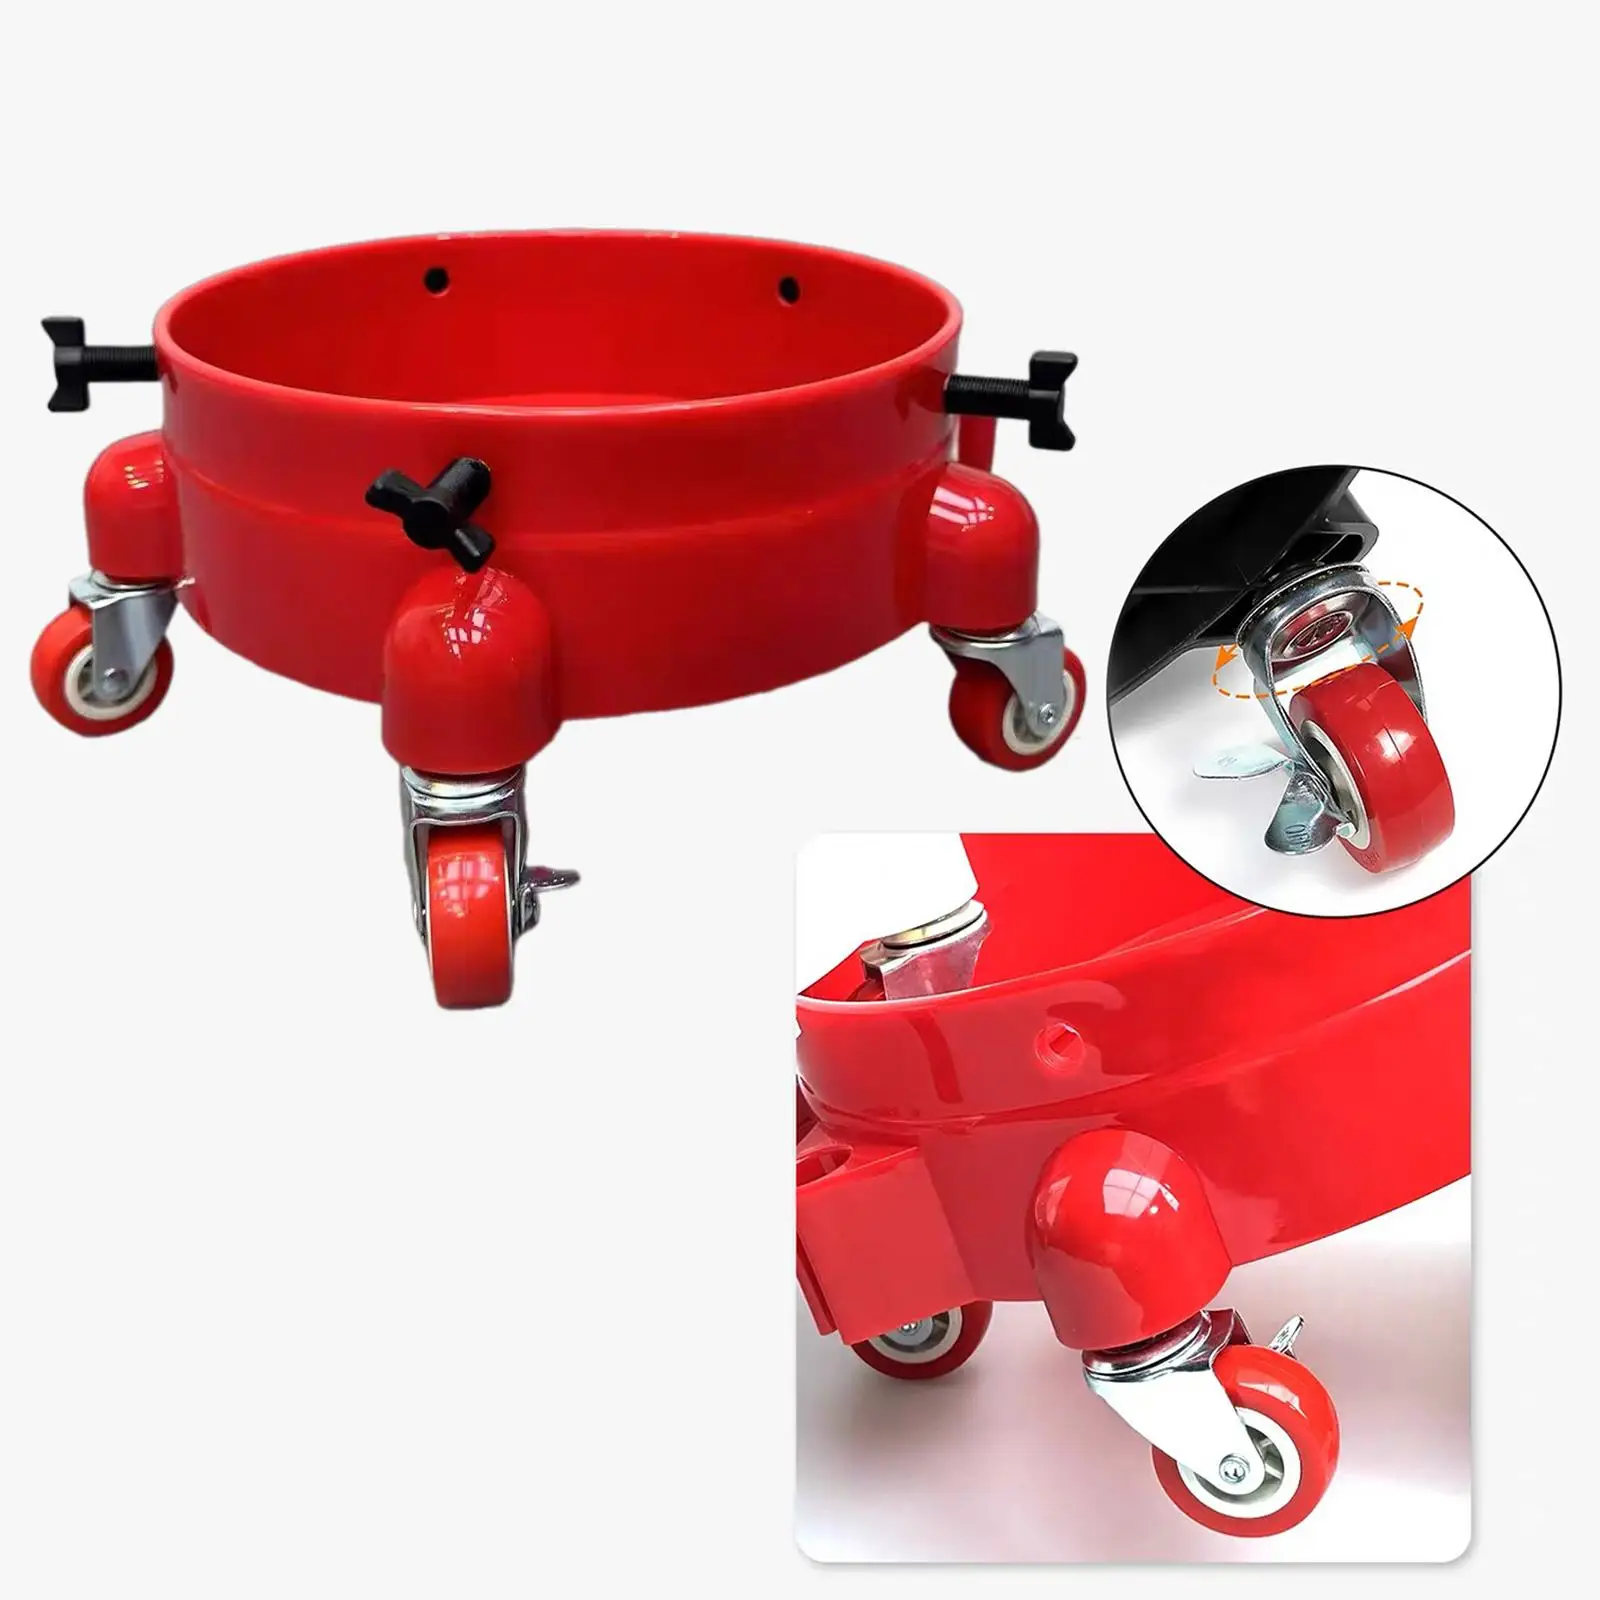 

Car Wash Bucket Dolly Rolling Bucket Dolly Heavy Duty Wear Resistance Round Automotive Accessory for Painting Assistance